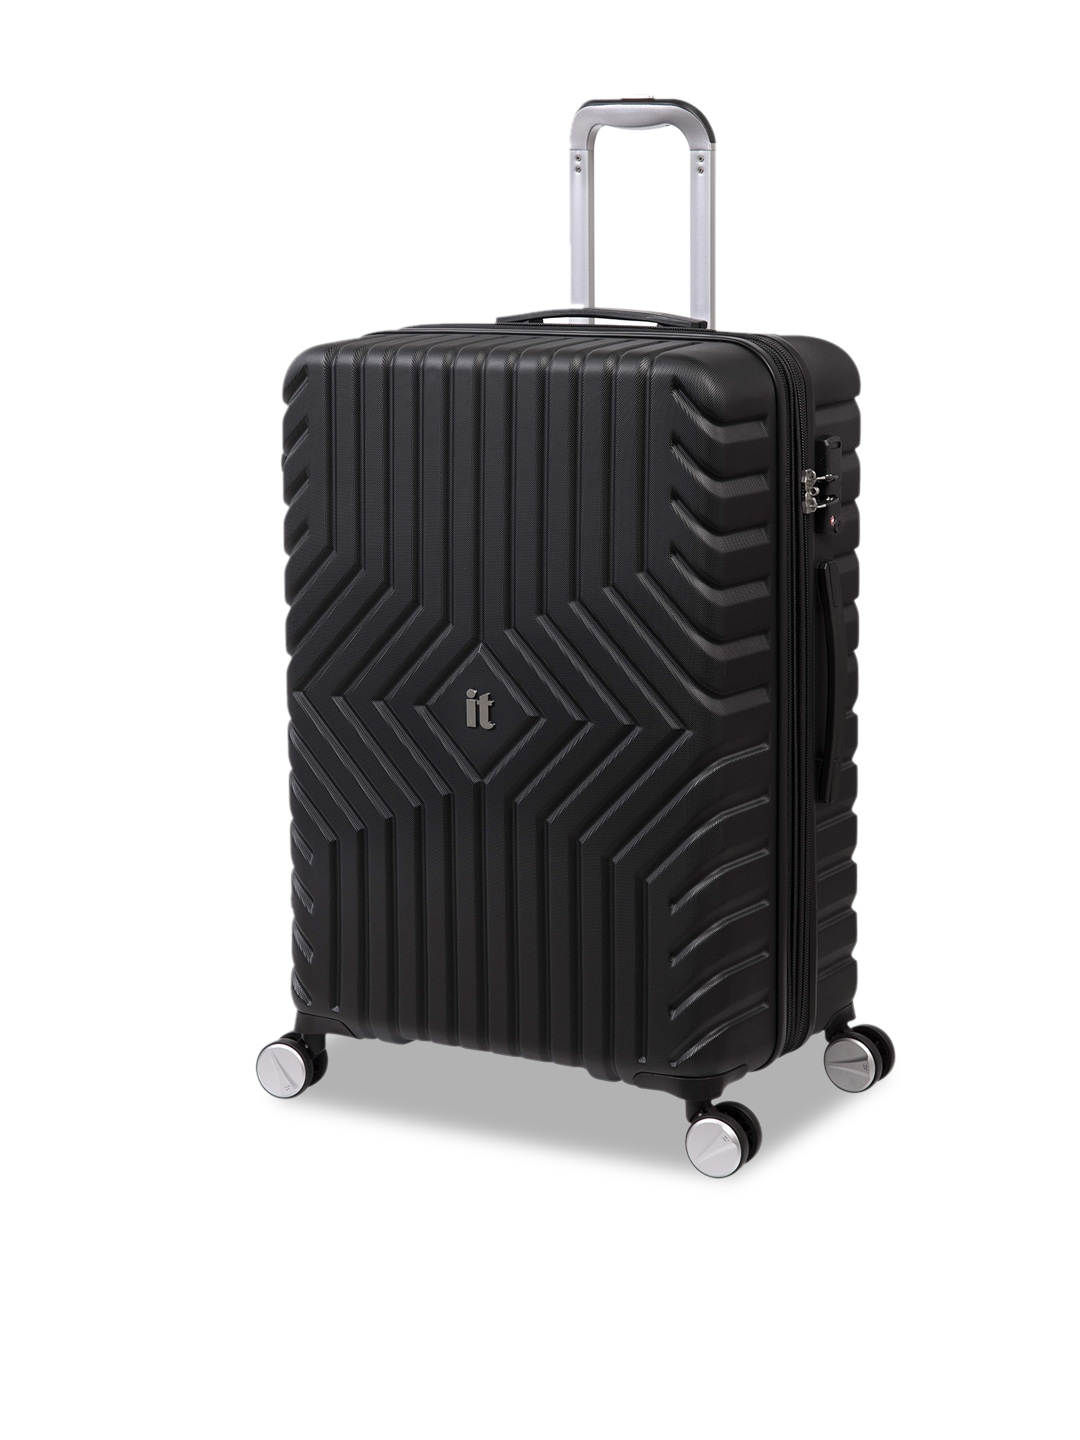 IT luggage Black Solid Hard-Sided Trolley Bag Price in India